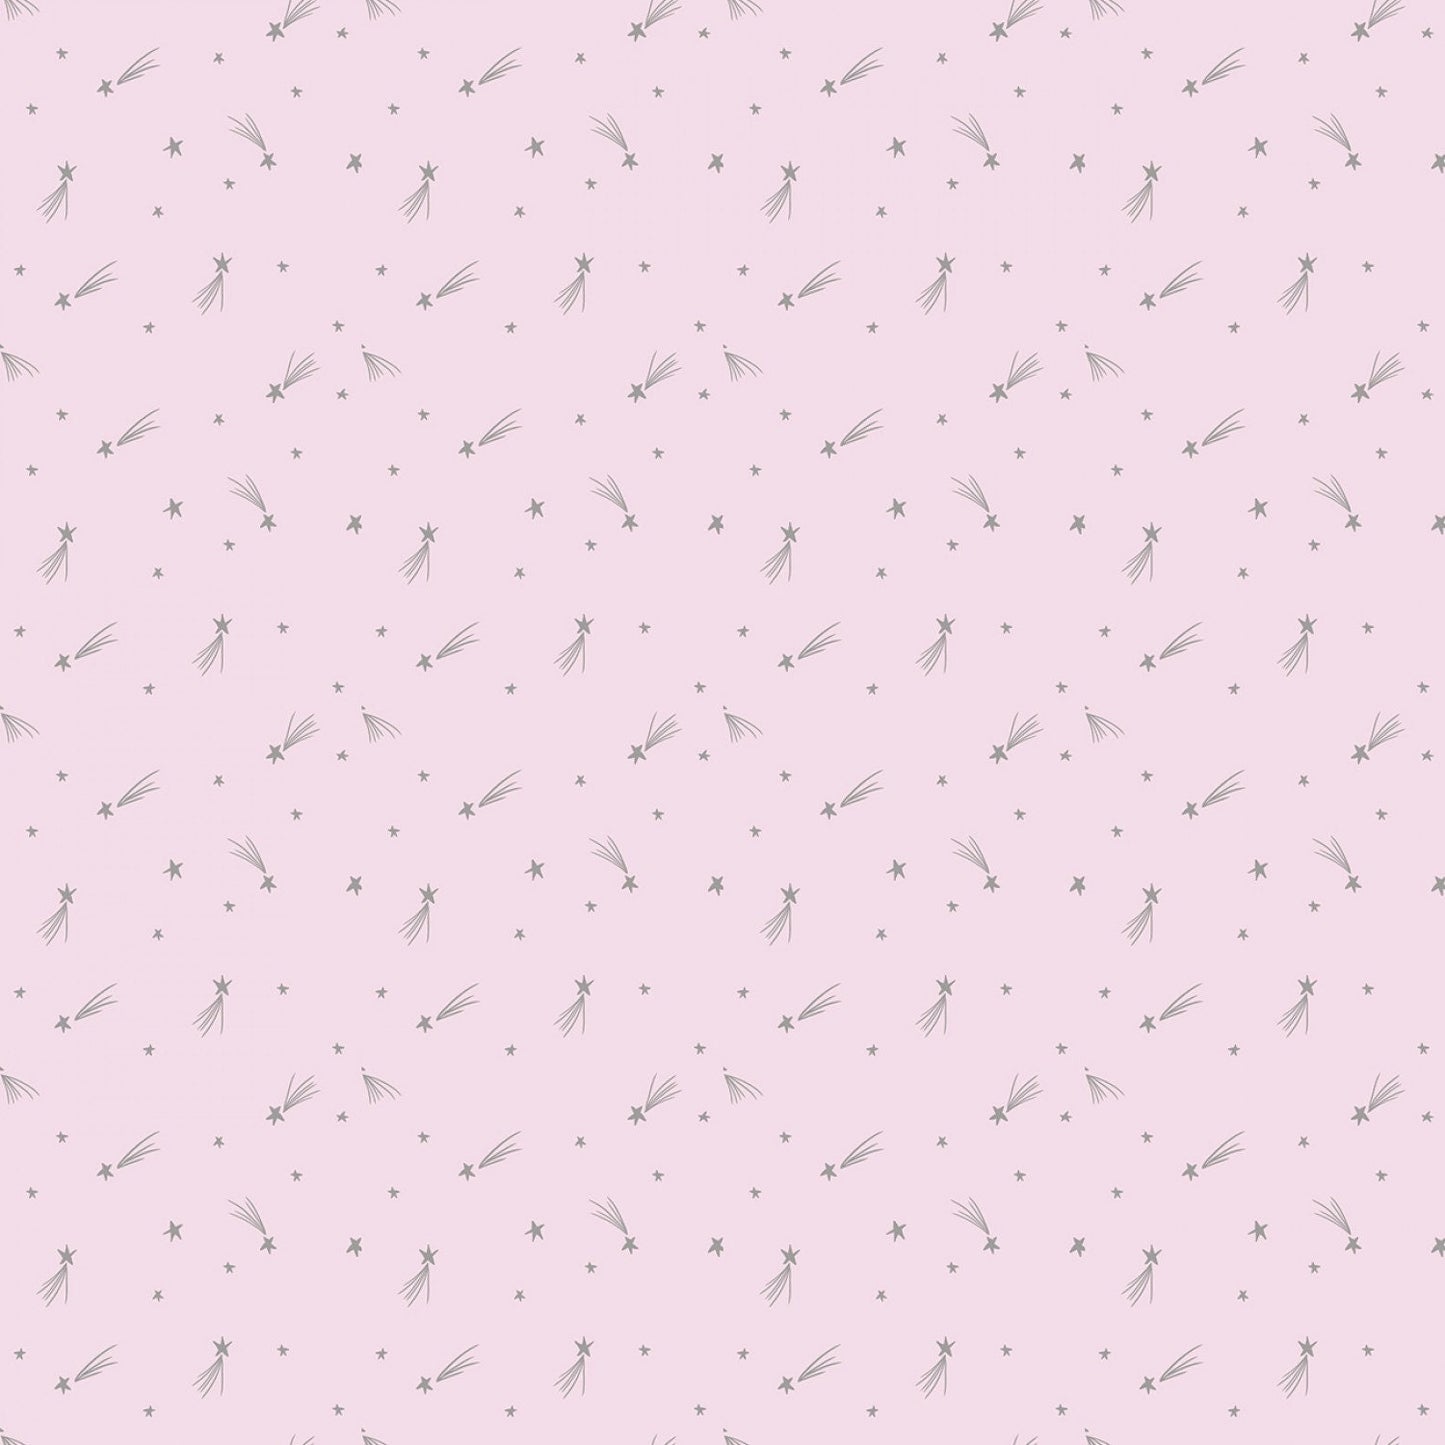 My Unicorn by Kelly Panacci Shooting Stars Pink with Sparkle  SC8205R-PINK Cotton Woven Fabric